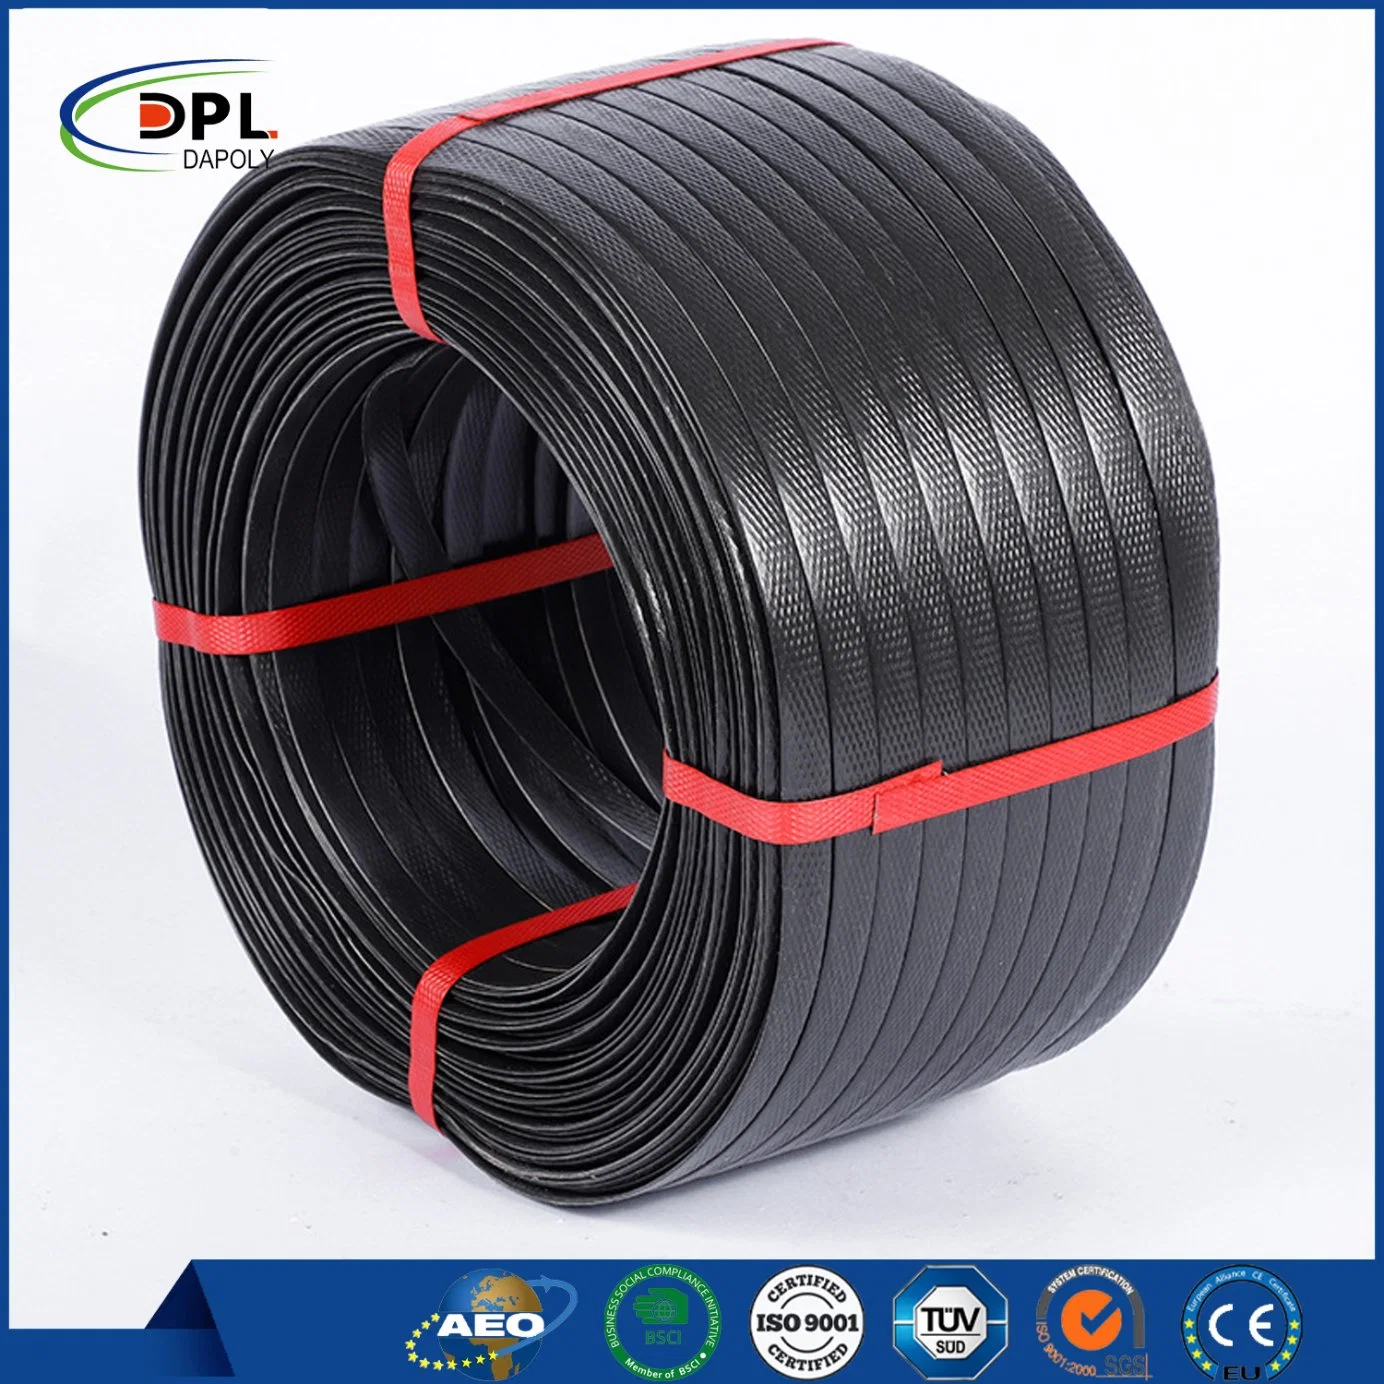 High Tension PP Polypropylene Packing Strapping Belt Tape Customized Color Strapping Tape for Machine and Hand Sale Well